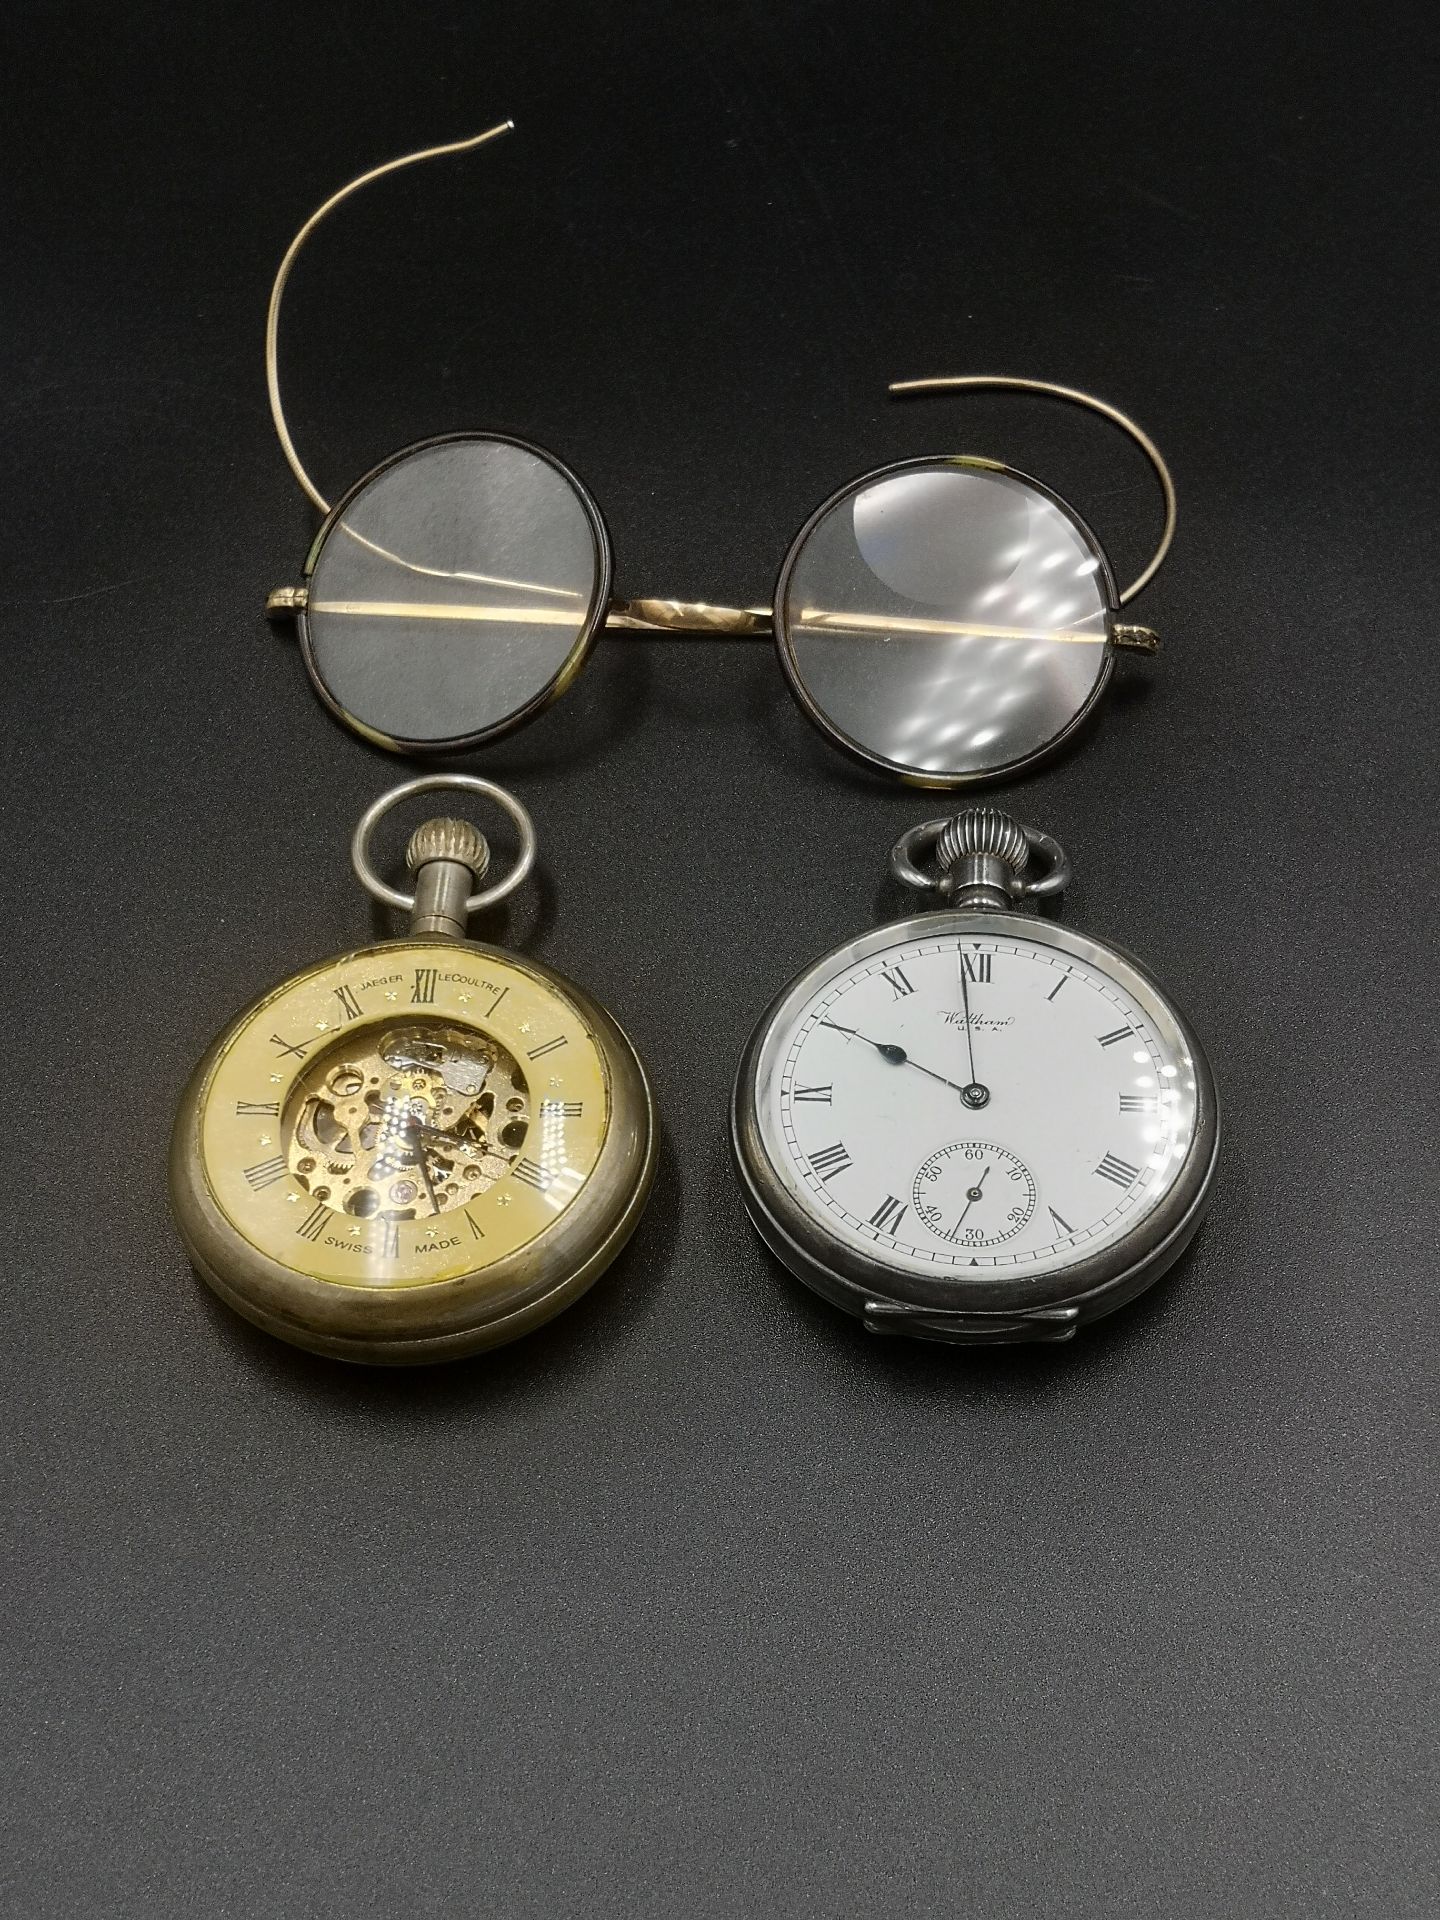 Waltham silver cased pocket watch; a pocket watch; rolled gold pair of spectacles